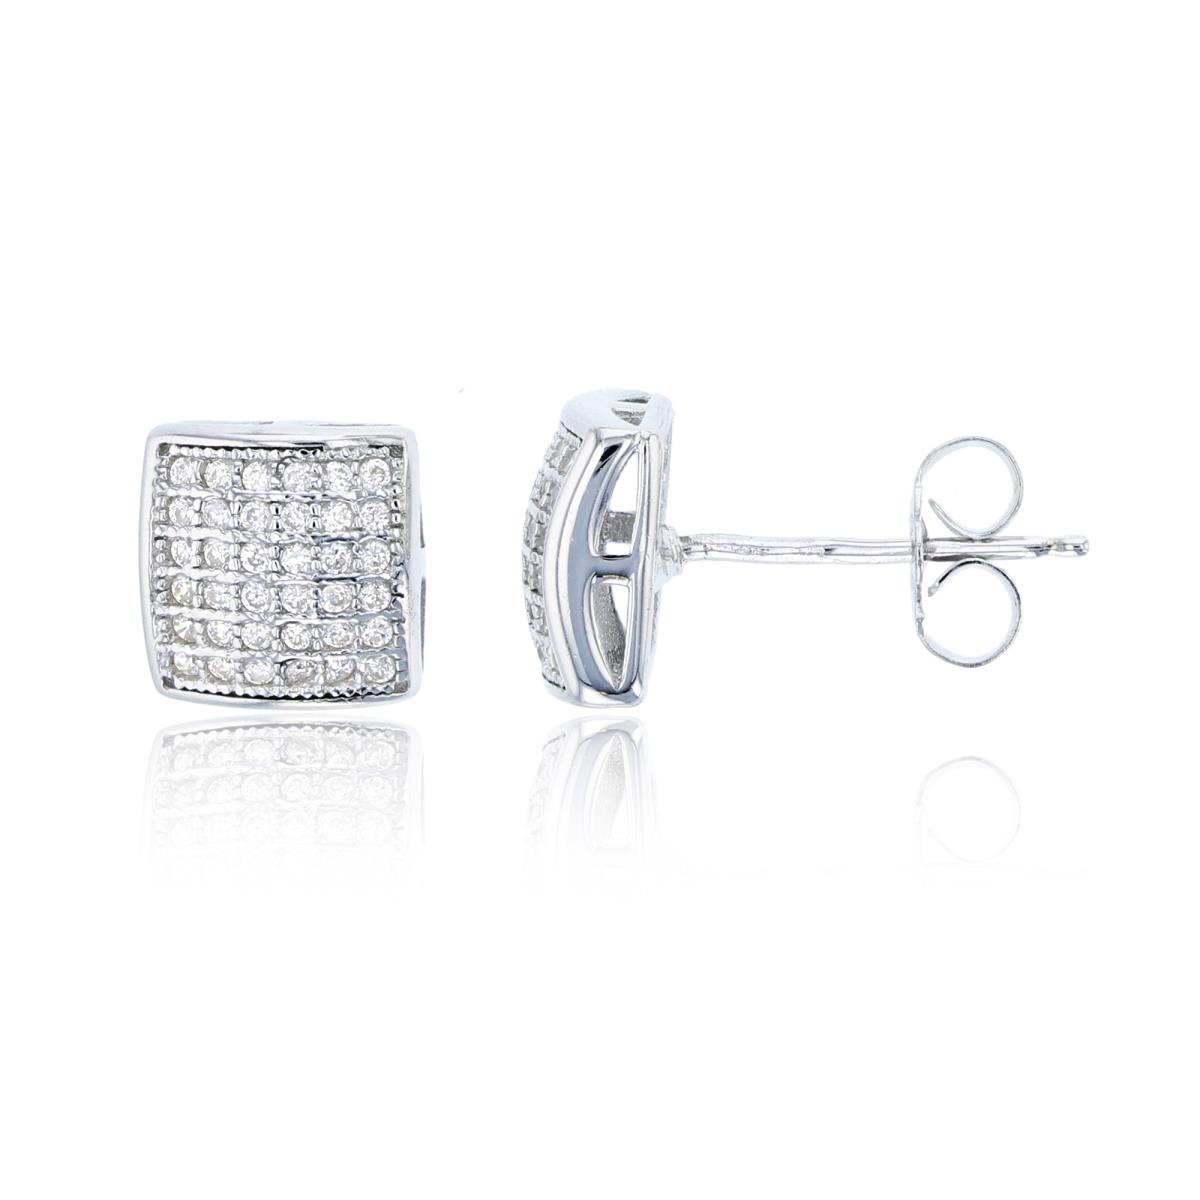 Sterling Silver 9x9mm Micropave Domed Square Stud Earring